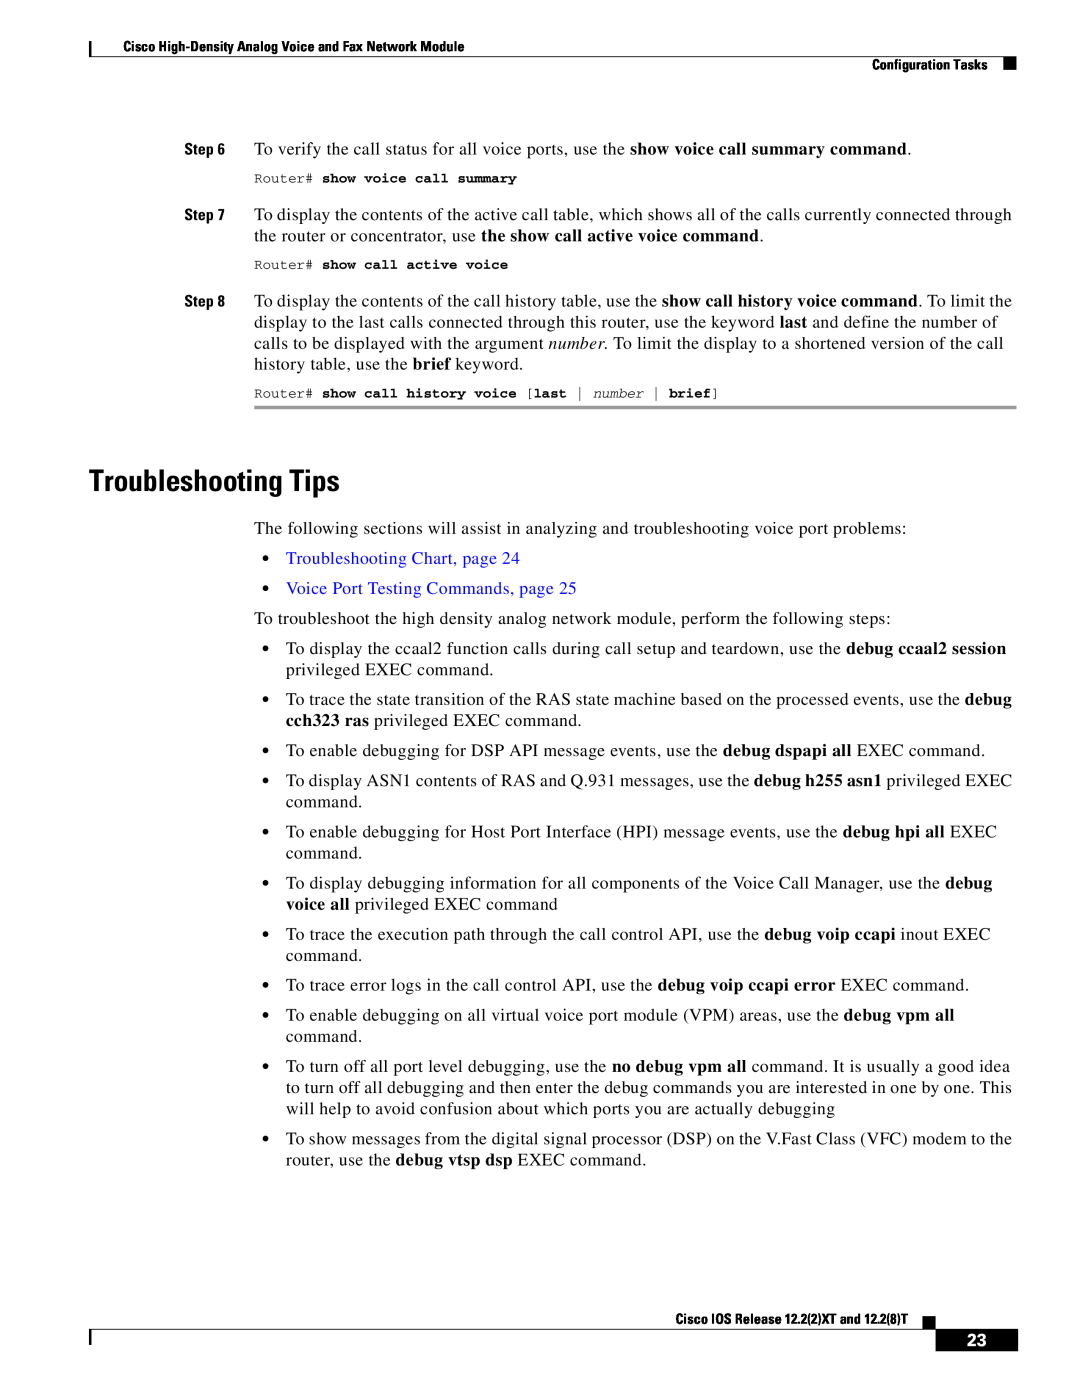 Weed Eater 2600 manual Troubleshooting Tips, Troubleshooting Chart, page, Voice Port Testing Commands, page 